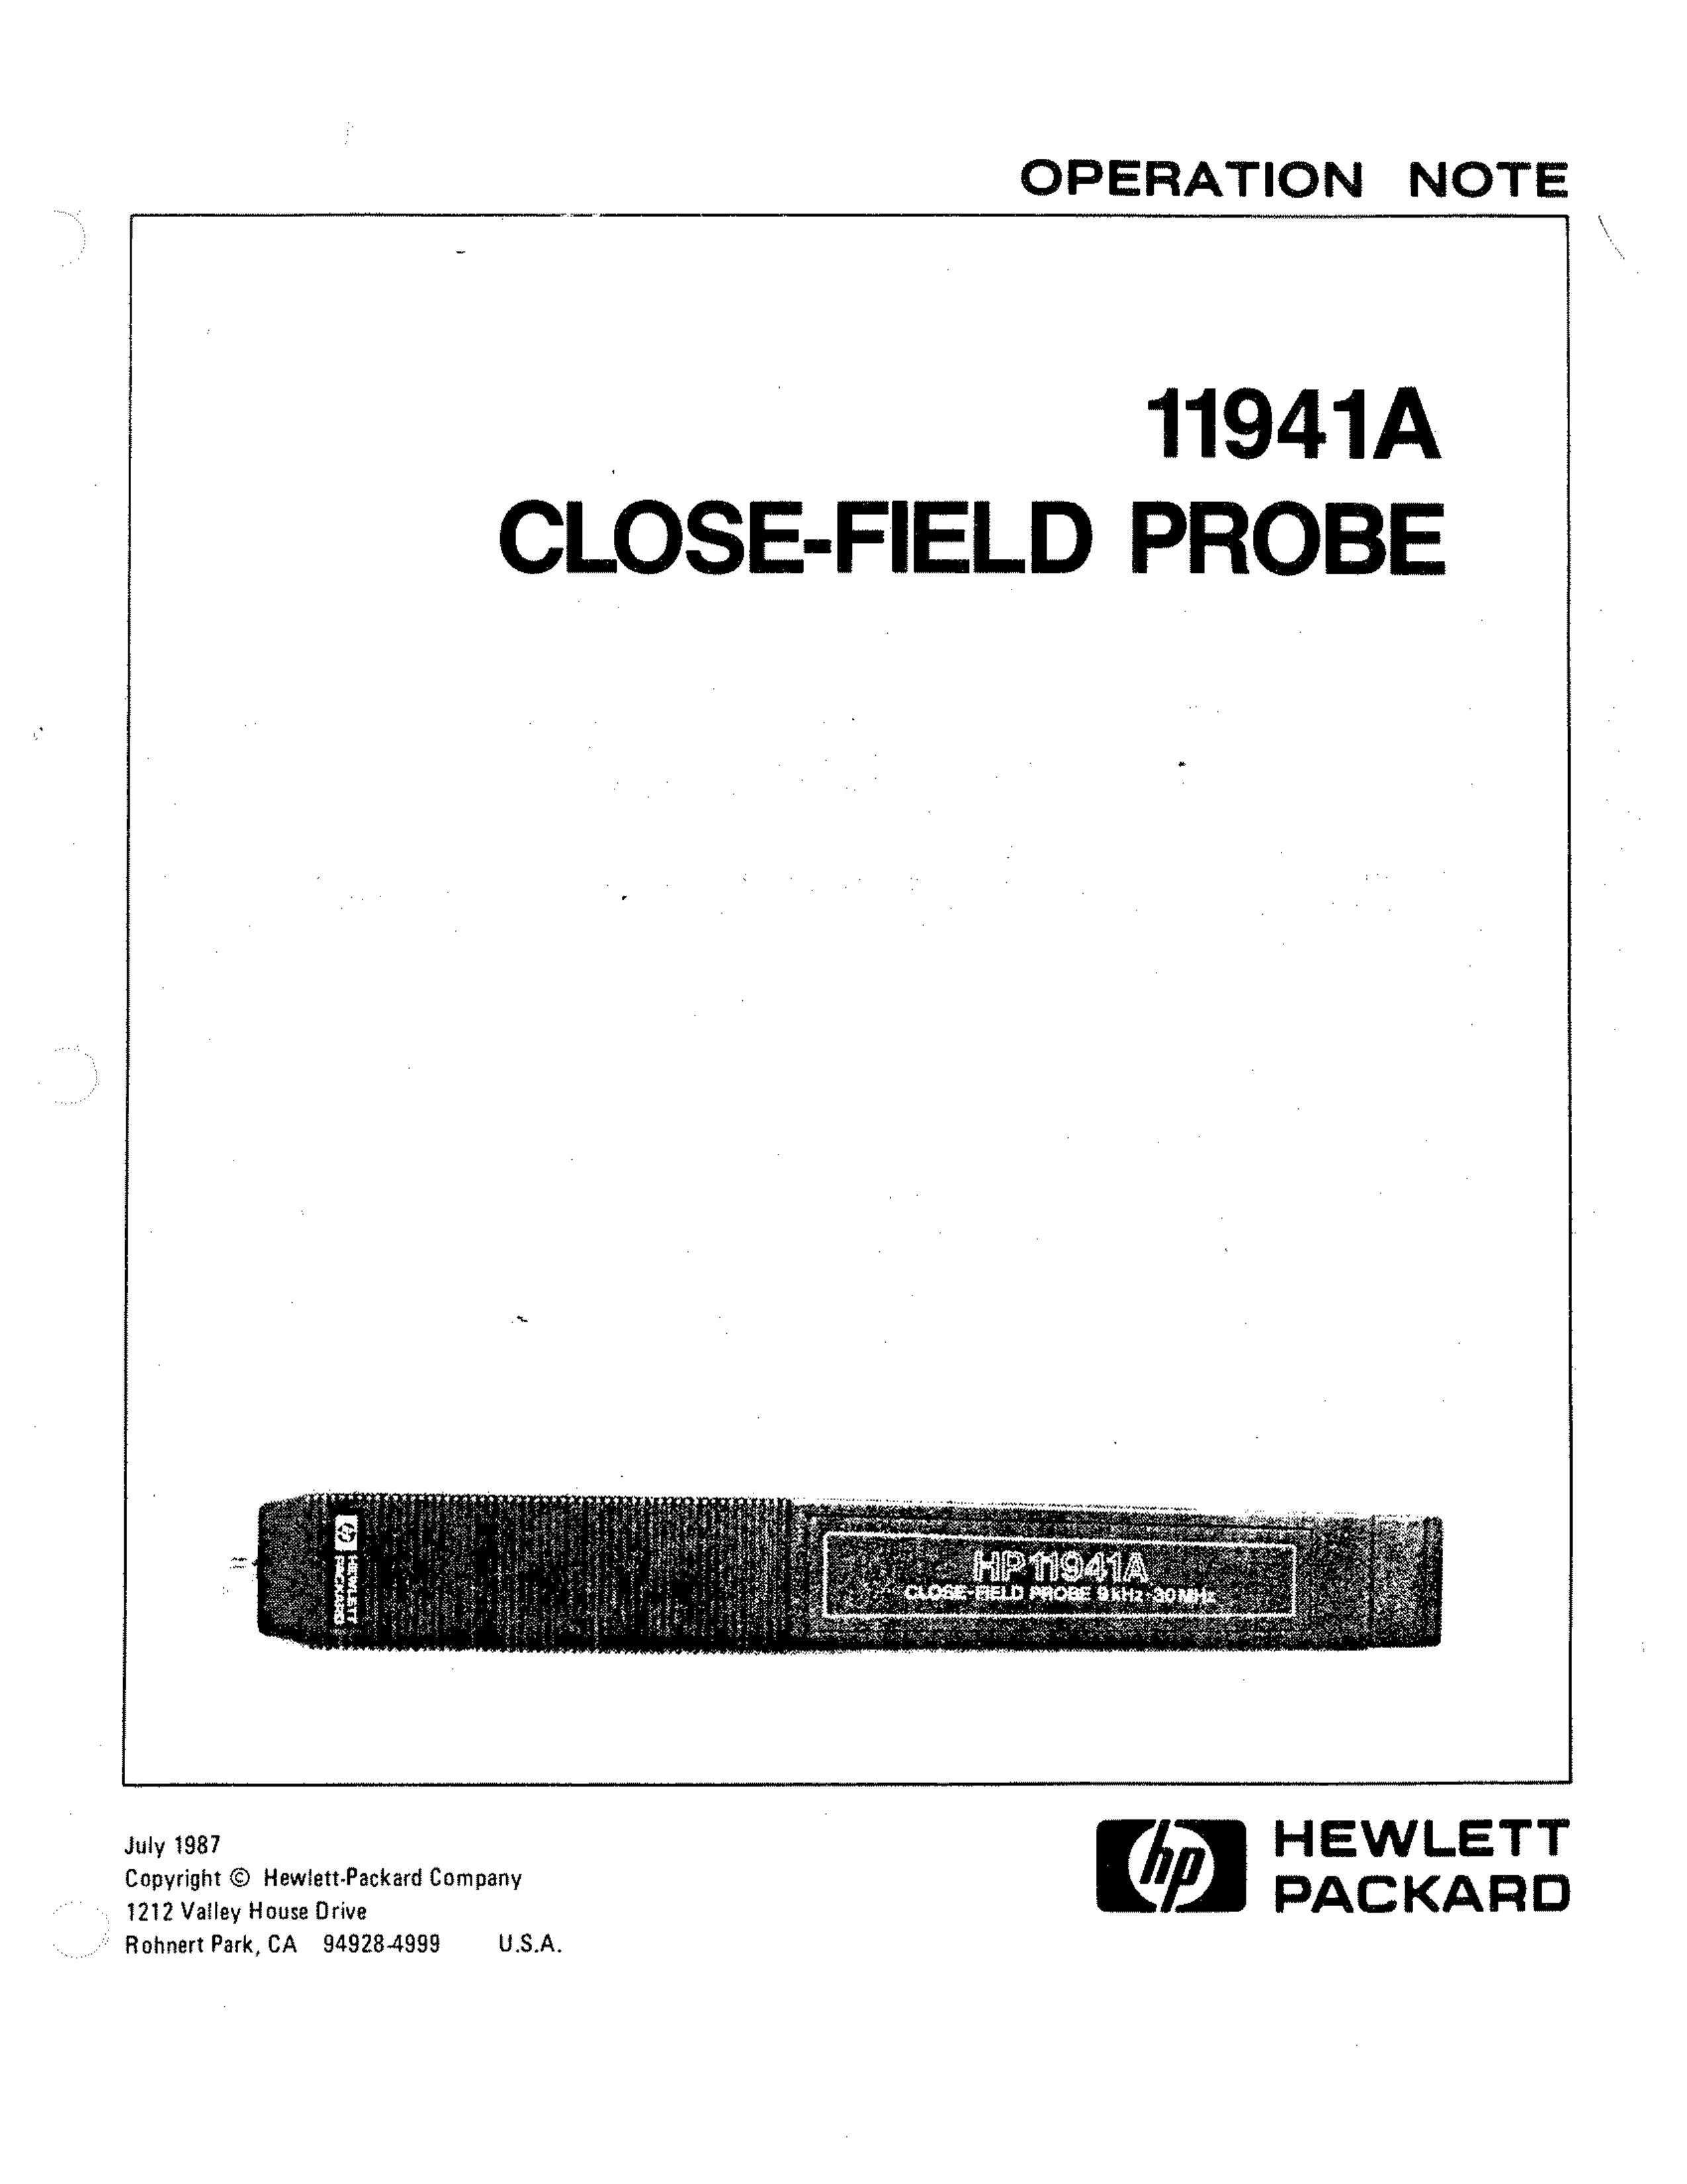 HP (Hewlett-Packard) 11941A Thermometer User Manual